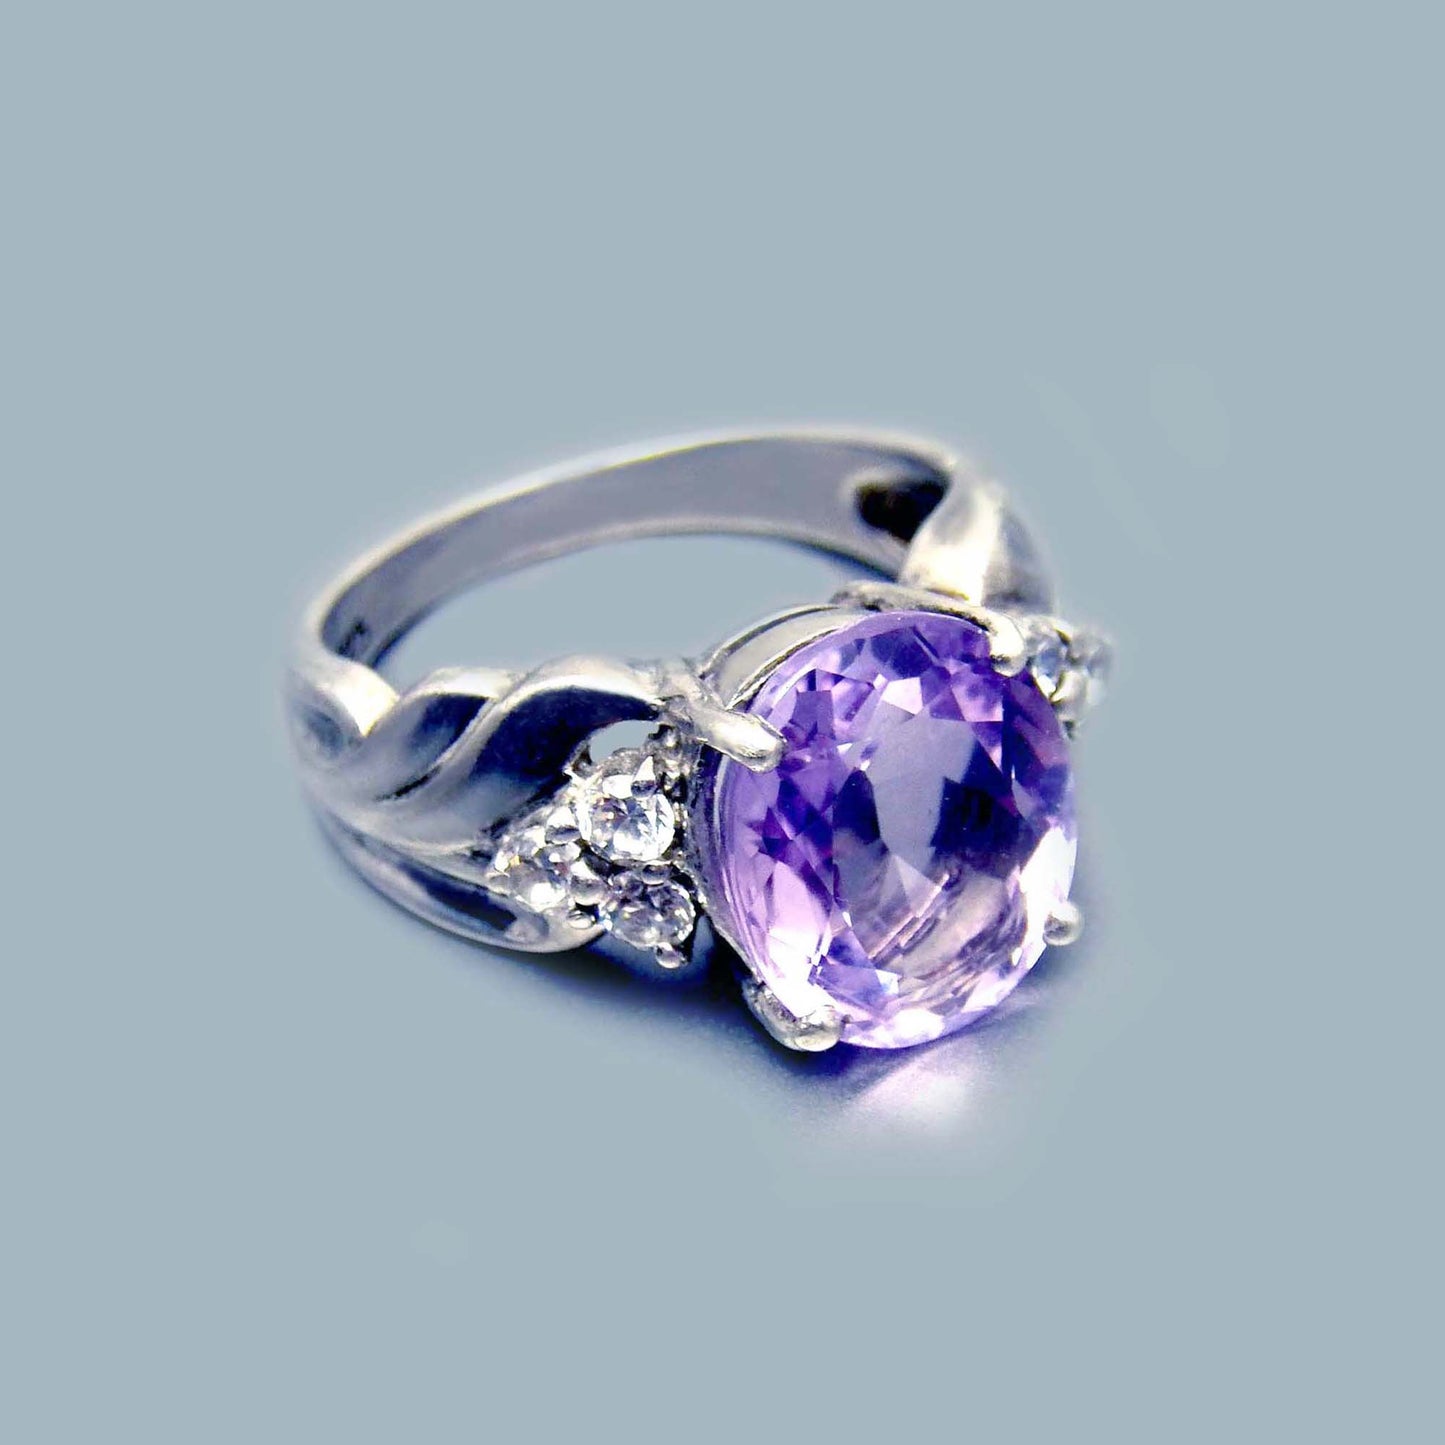 Oval Amethyst Statement Ring, Sterling Silver CZ Vintage Jewelry